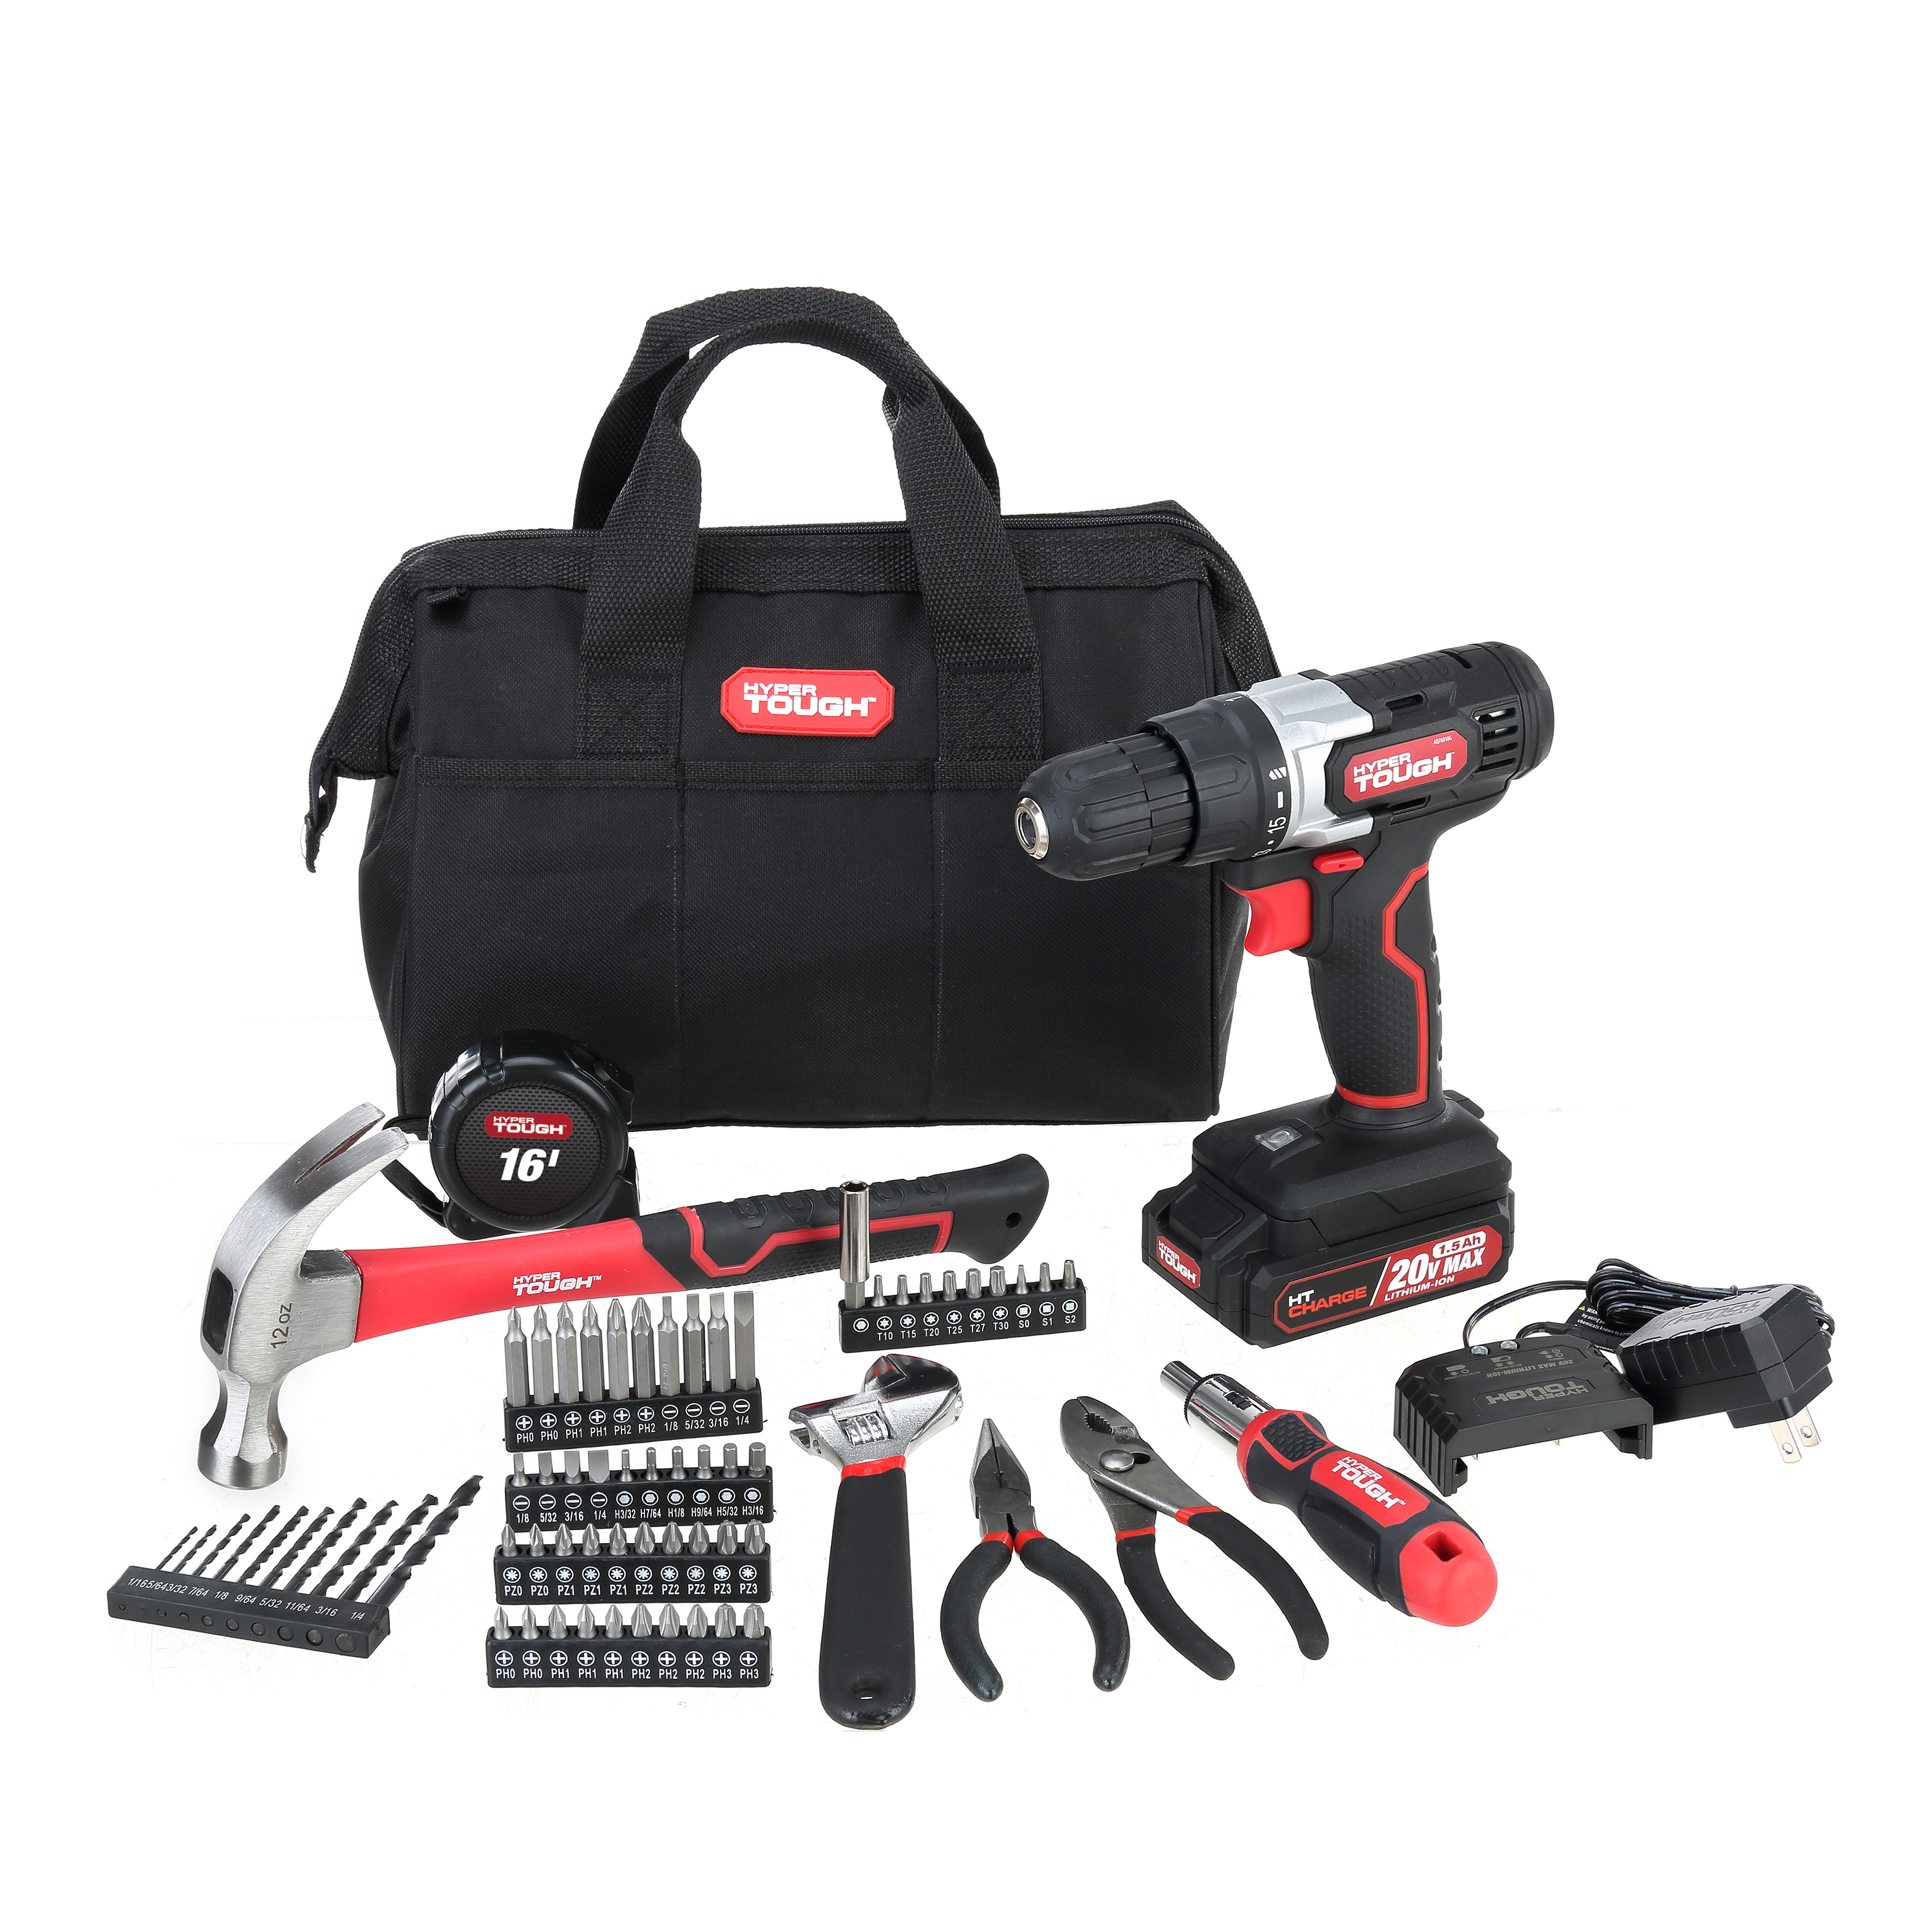 Hyper Tough 20V Max Lithium-Ion 3/8 inch Cordless Drill, 70-Piece Home Tool Set, 1.5Ah Lithium-Ion Battery & Charger, Bit Holder, & Storage Bag - image 1 of 18